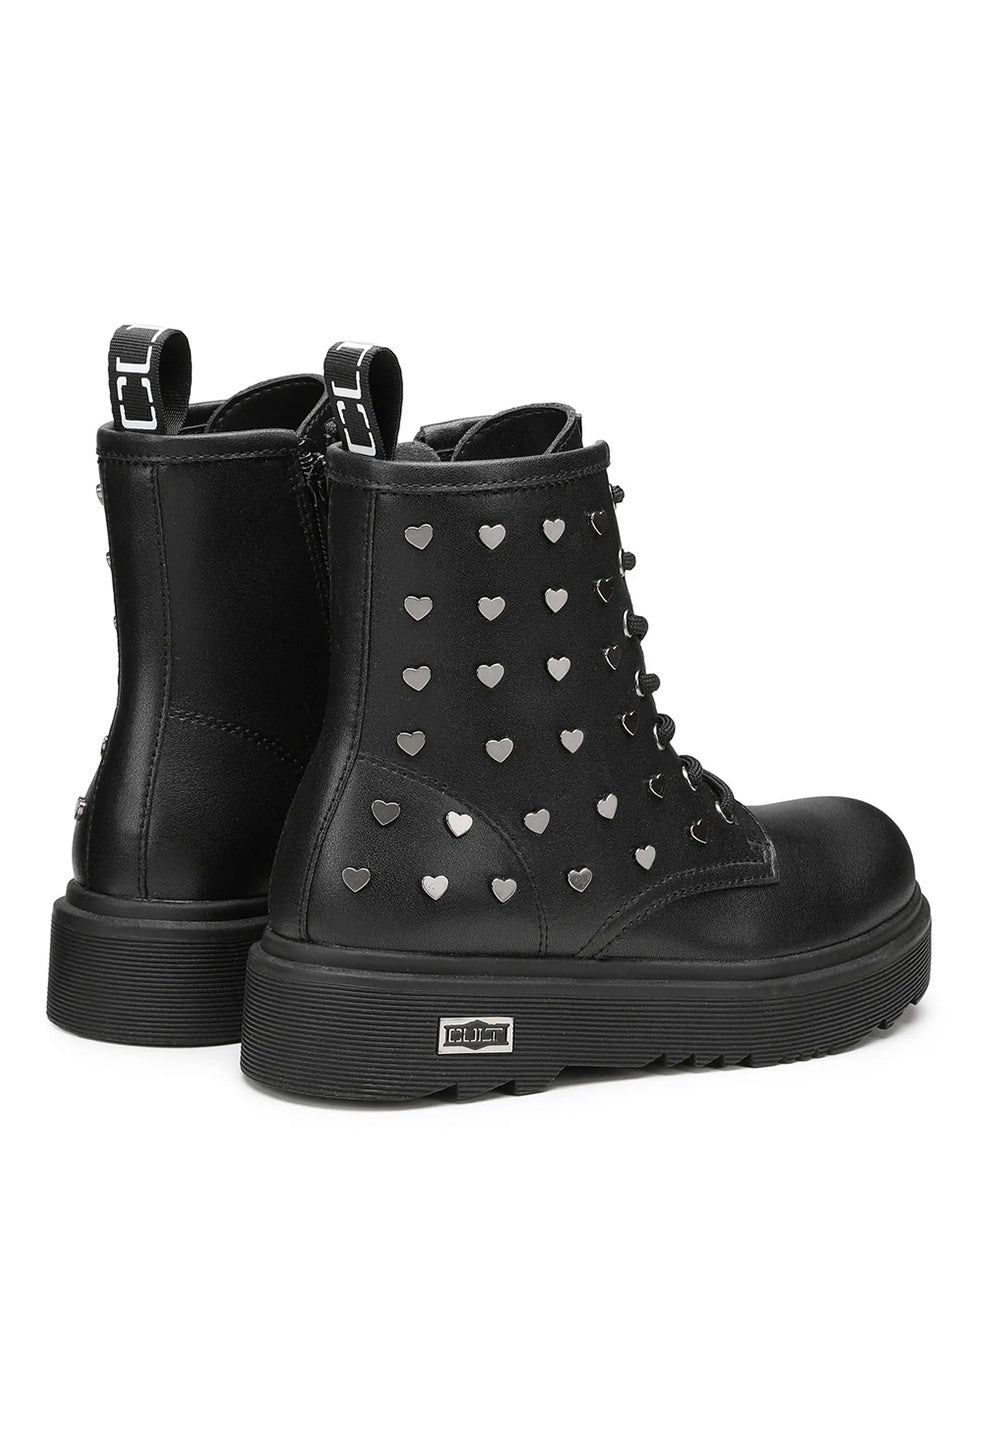 Black ankle boots for girls